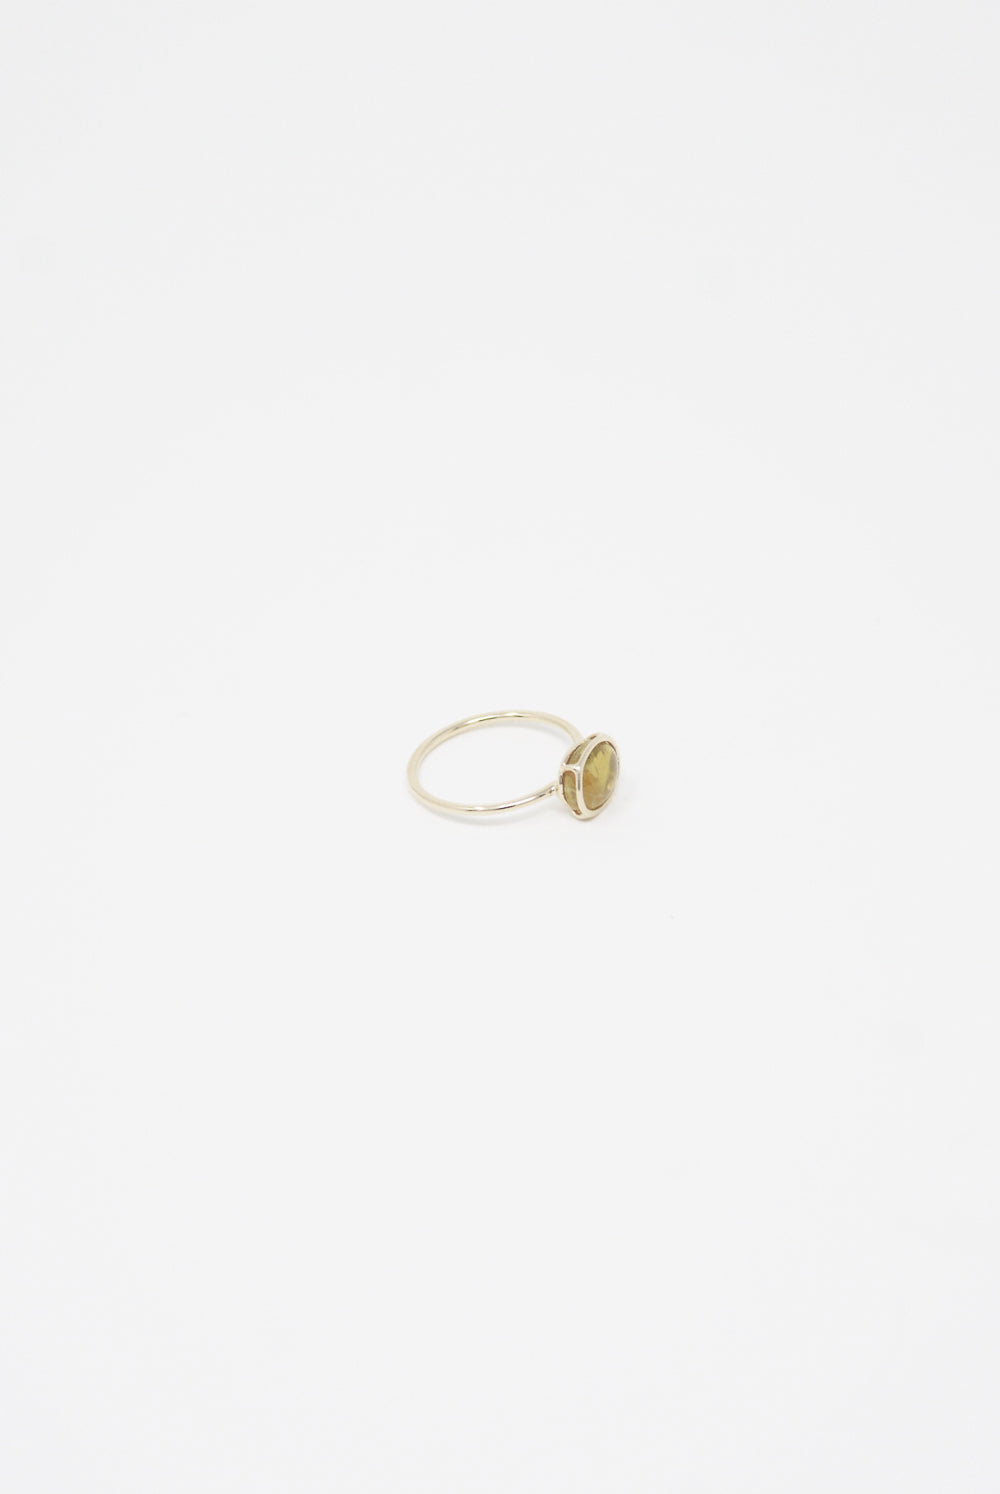 Mary MacGill - 14K Floating Ring in Yellow Tourmaline size 7 side view